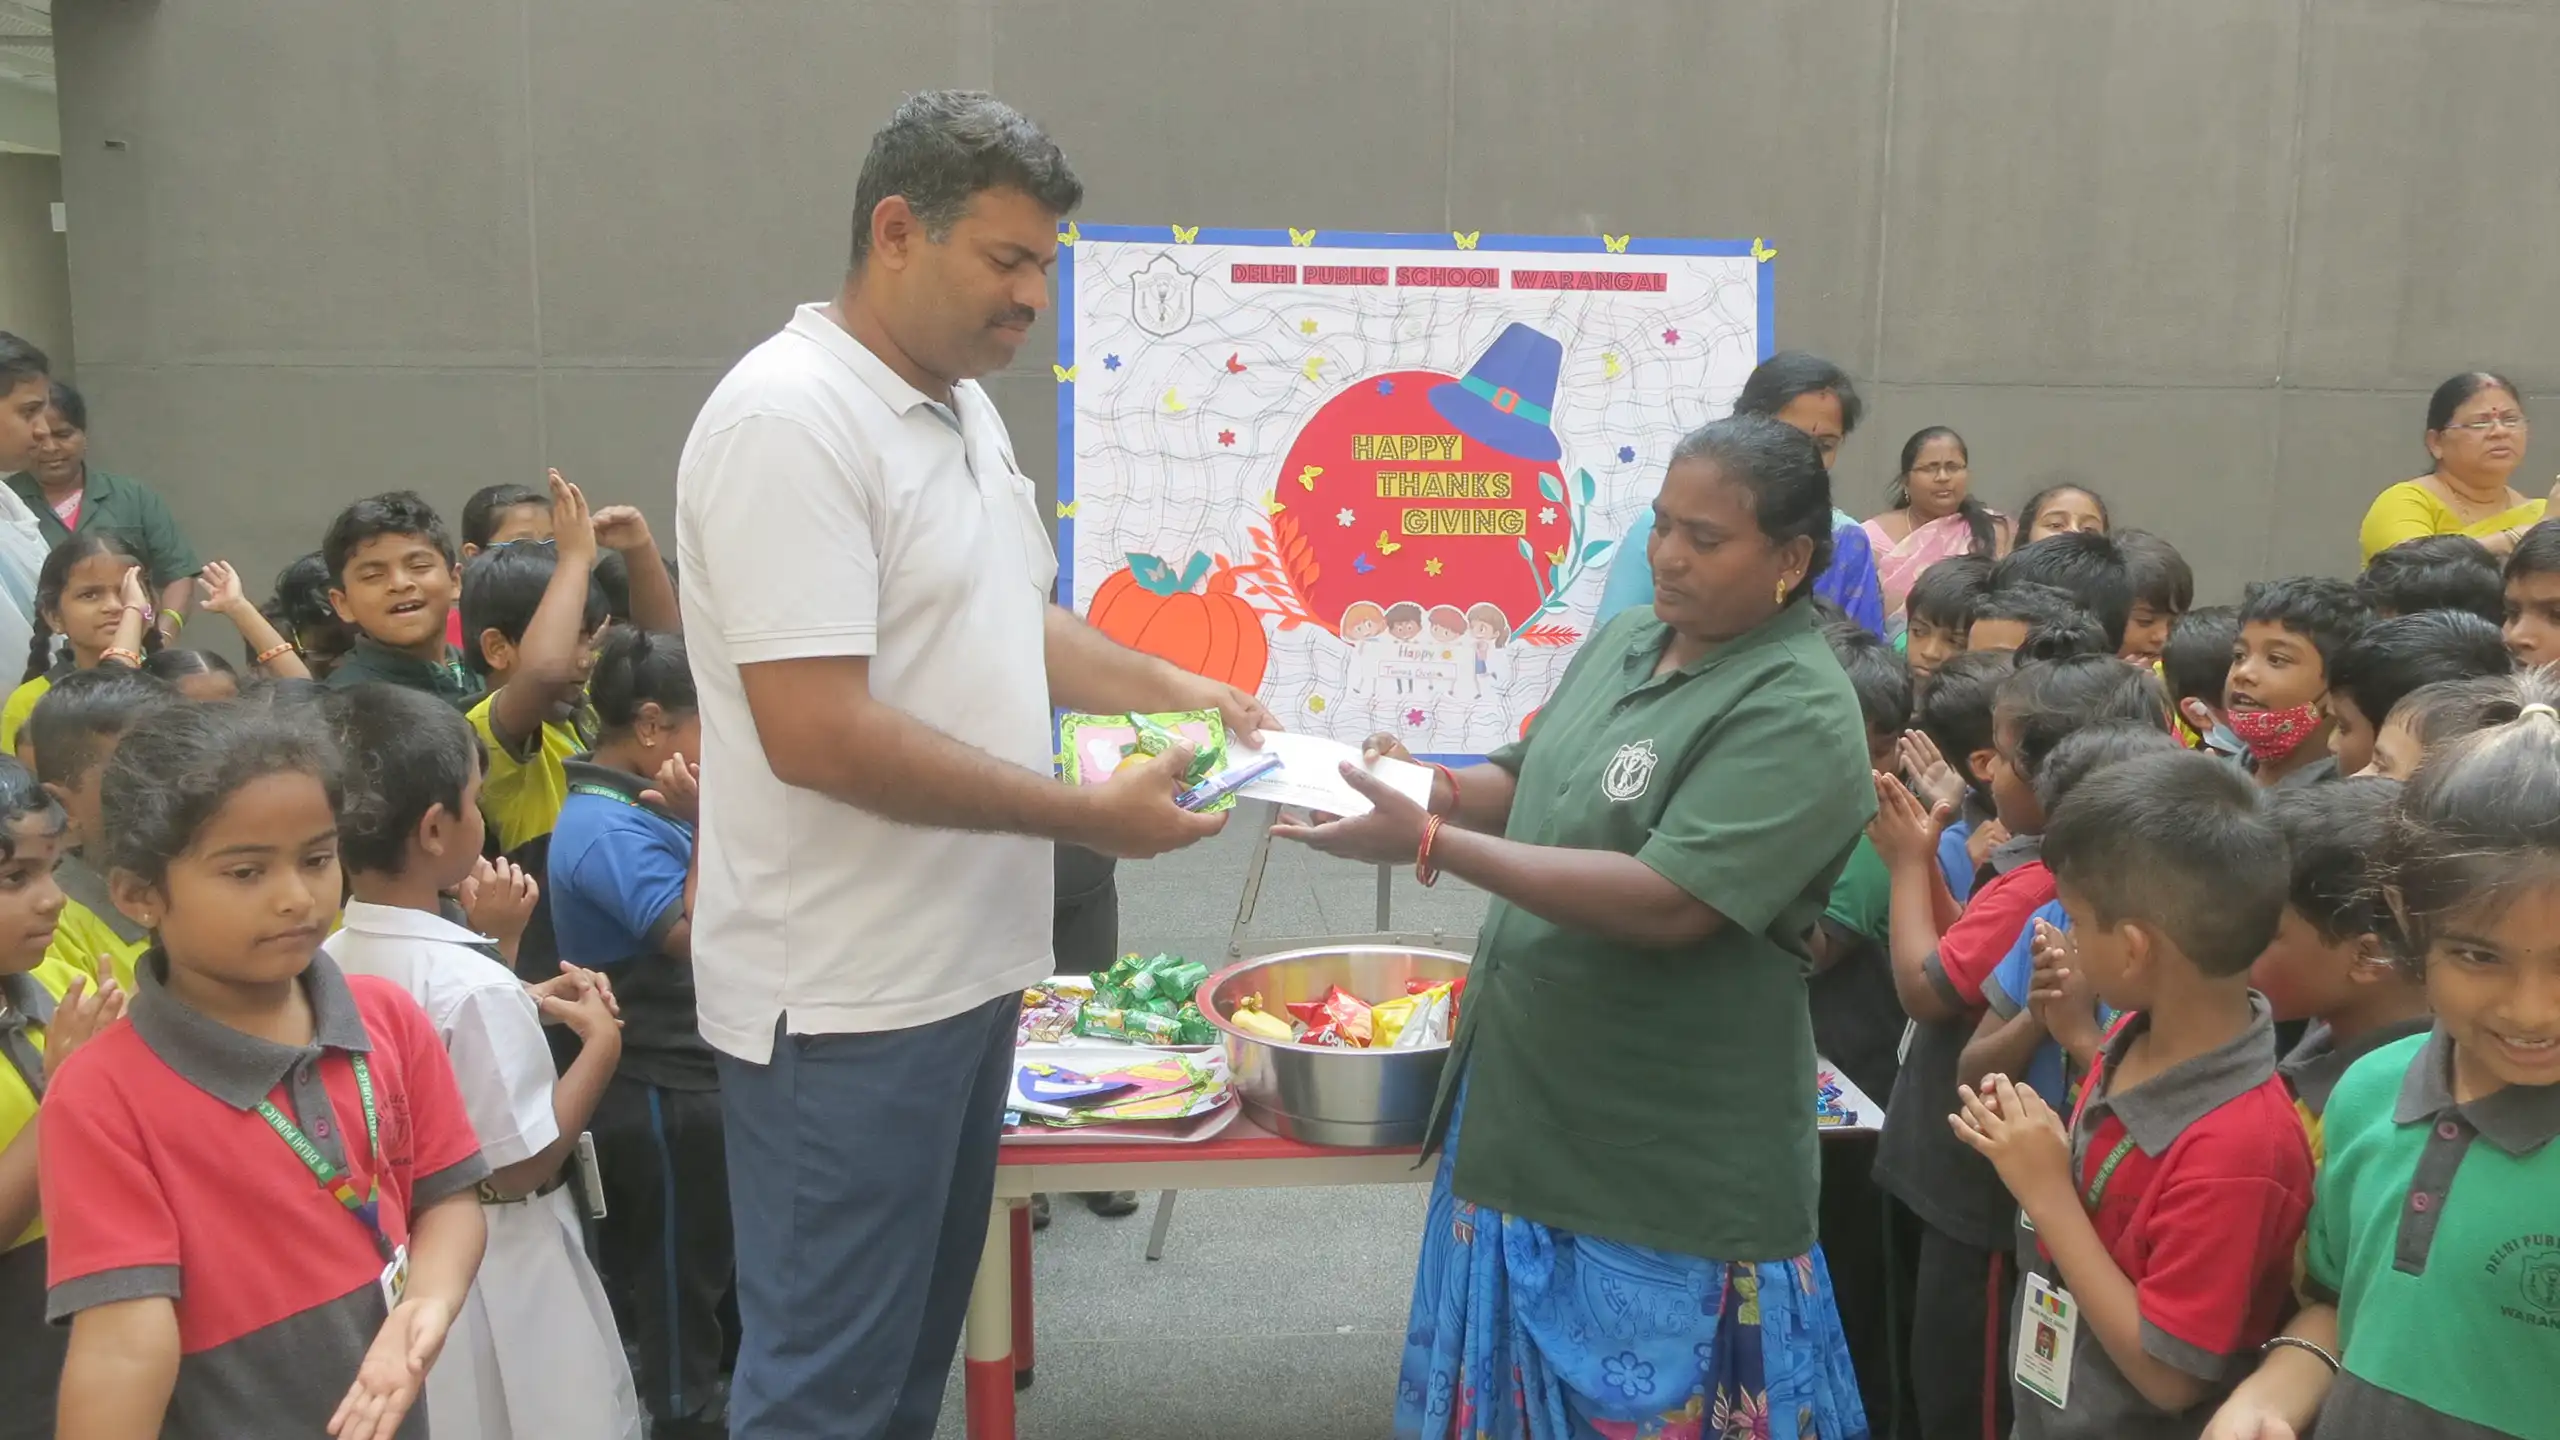 Staffs and helpers receiving gifts during thanksgiving celebration at DPS Warangal.